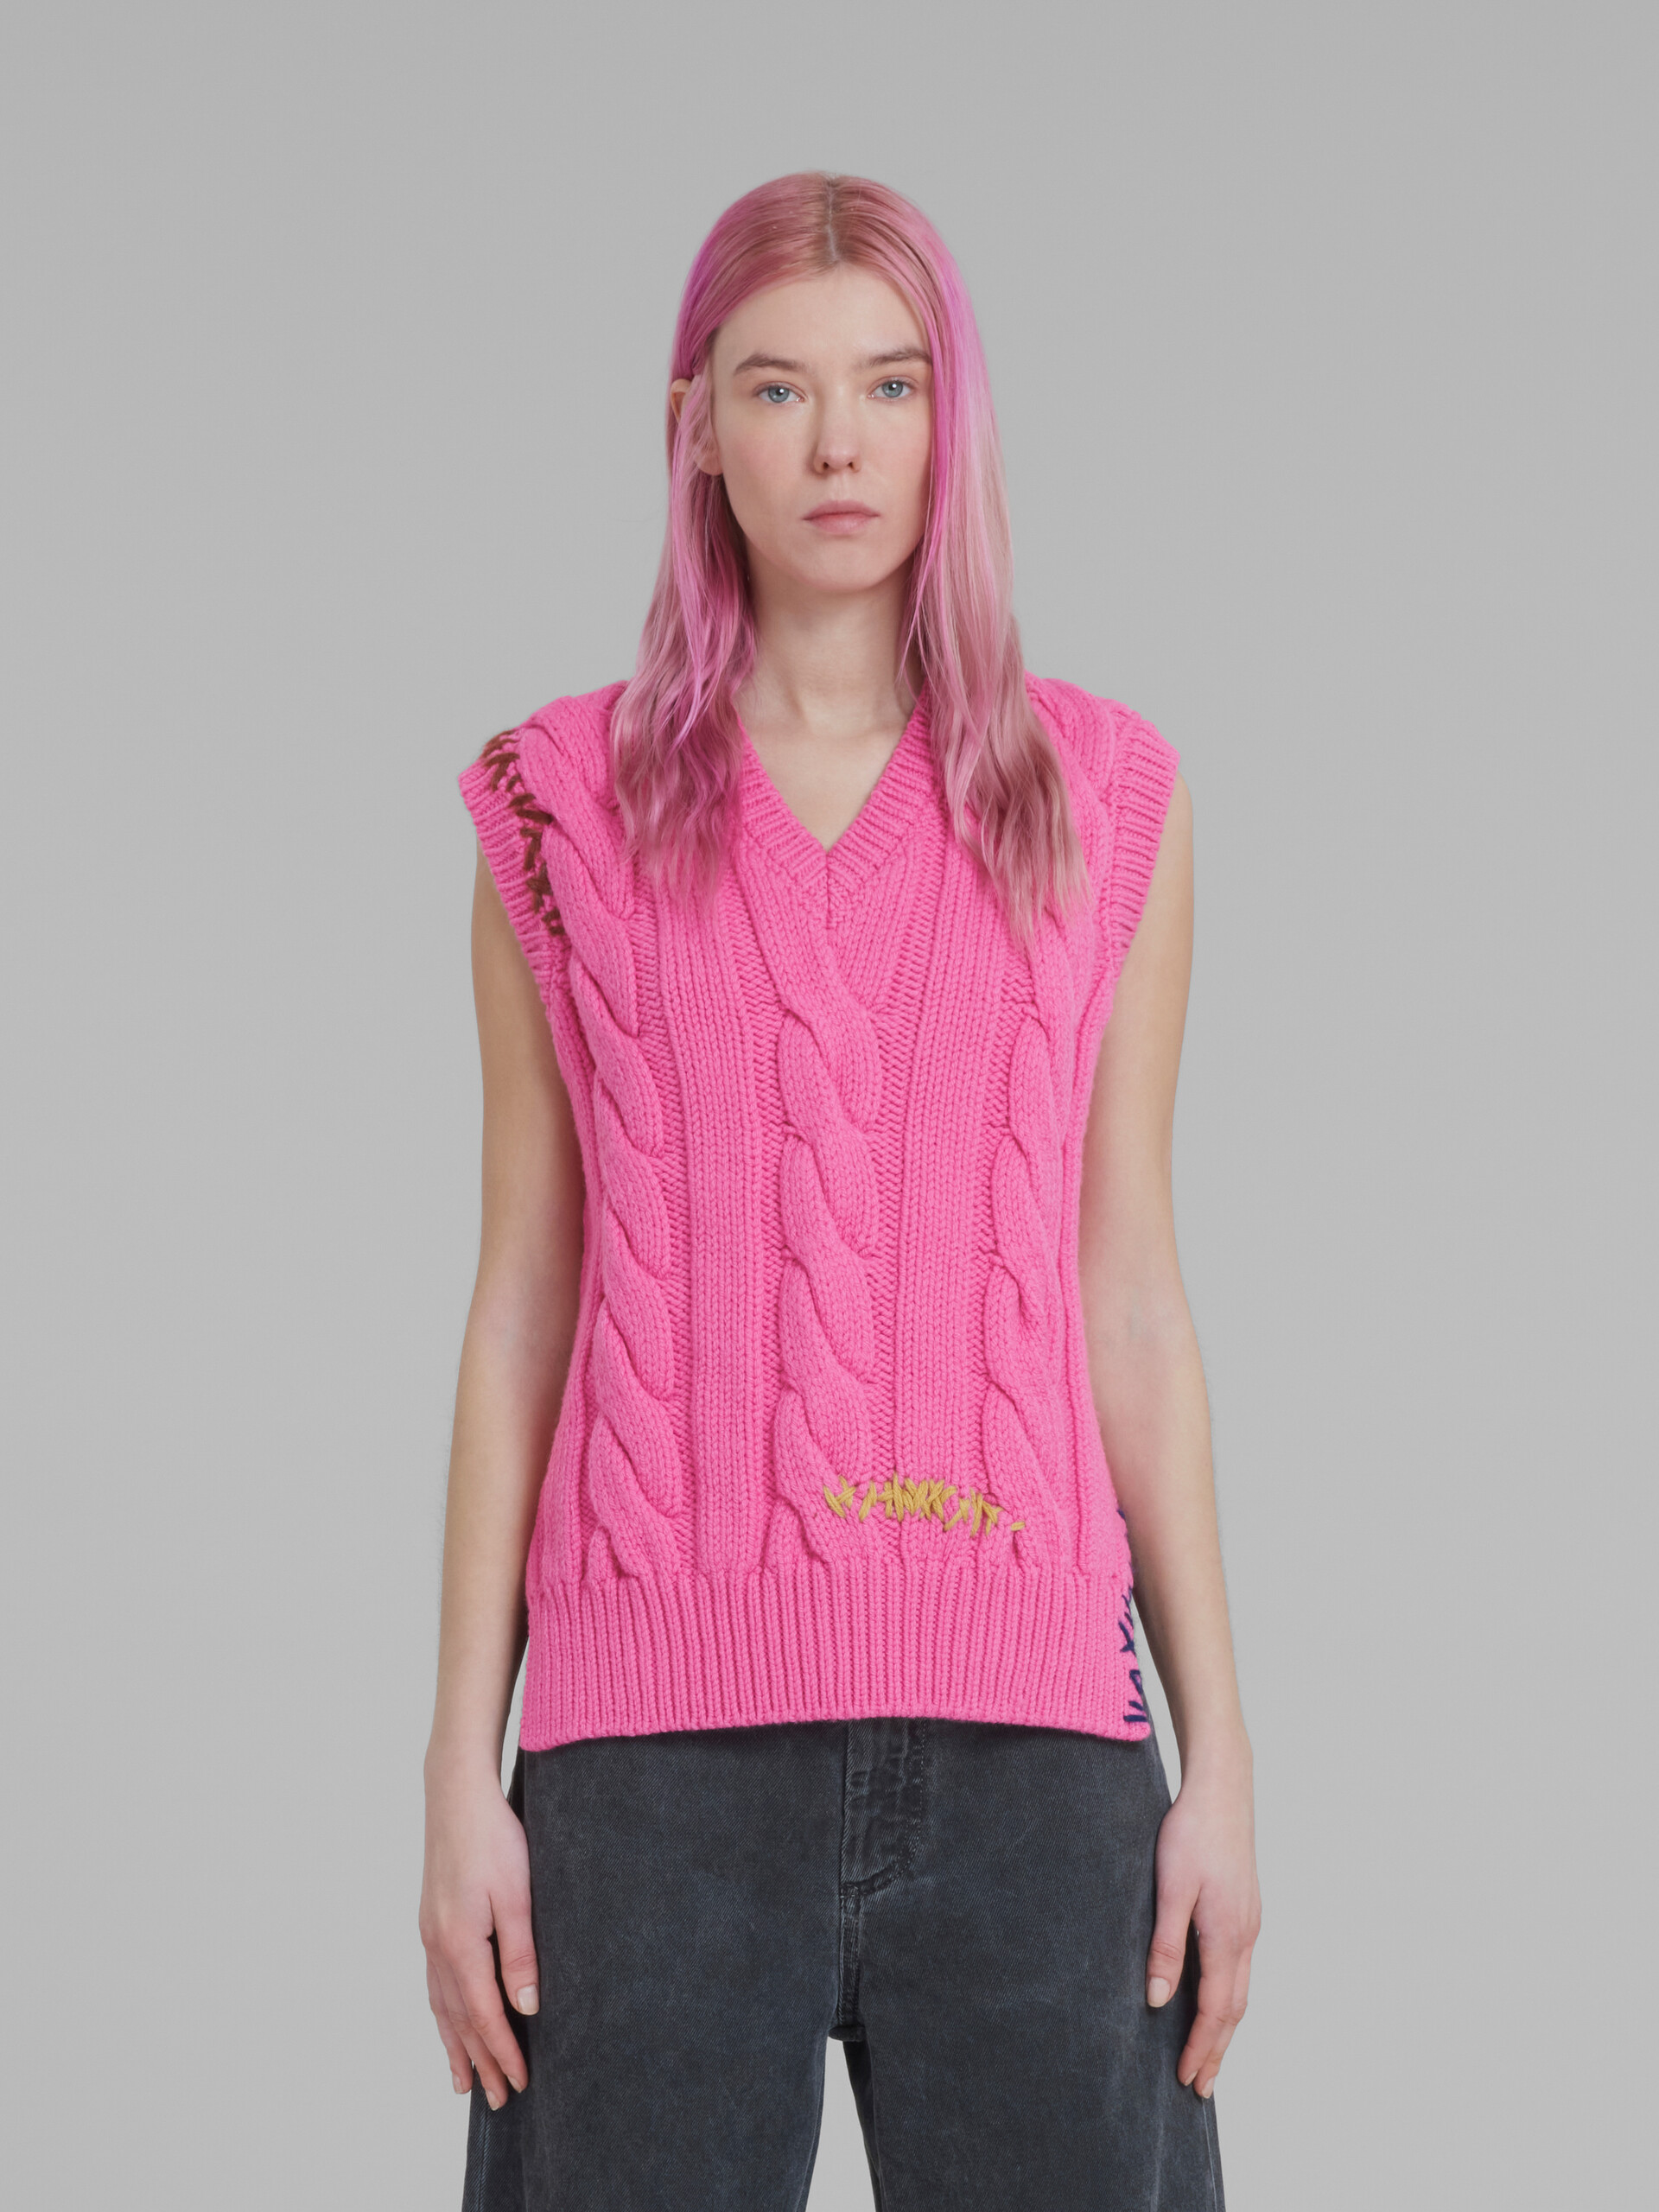 Fuchsia cable-knit vest - Pullovers - Image 2